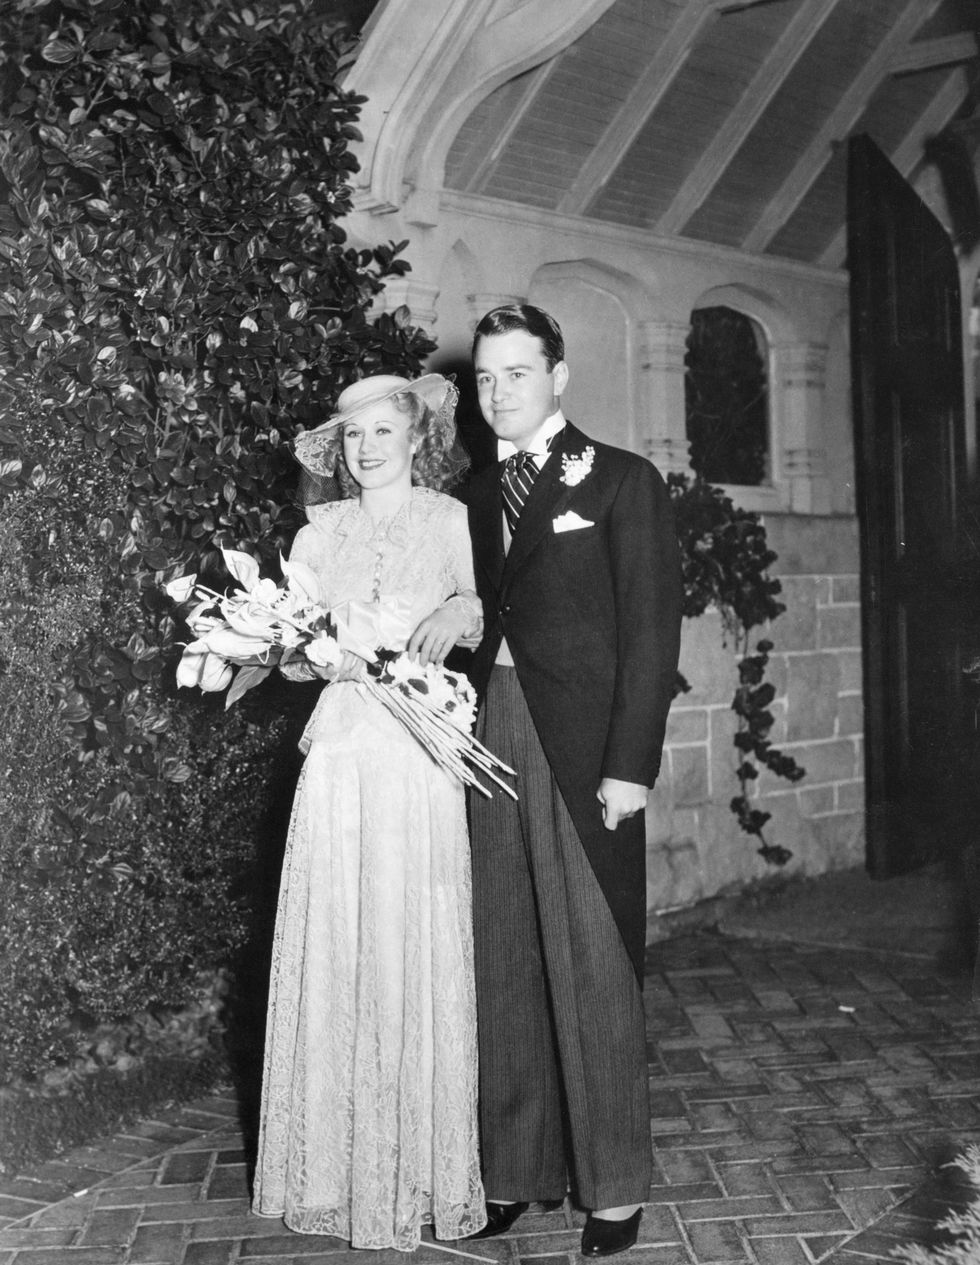 Ginger Rogers and Lew Ayres